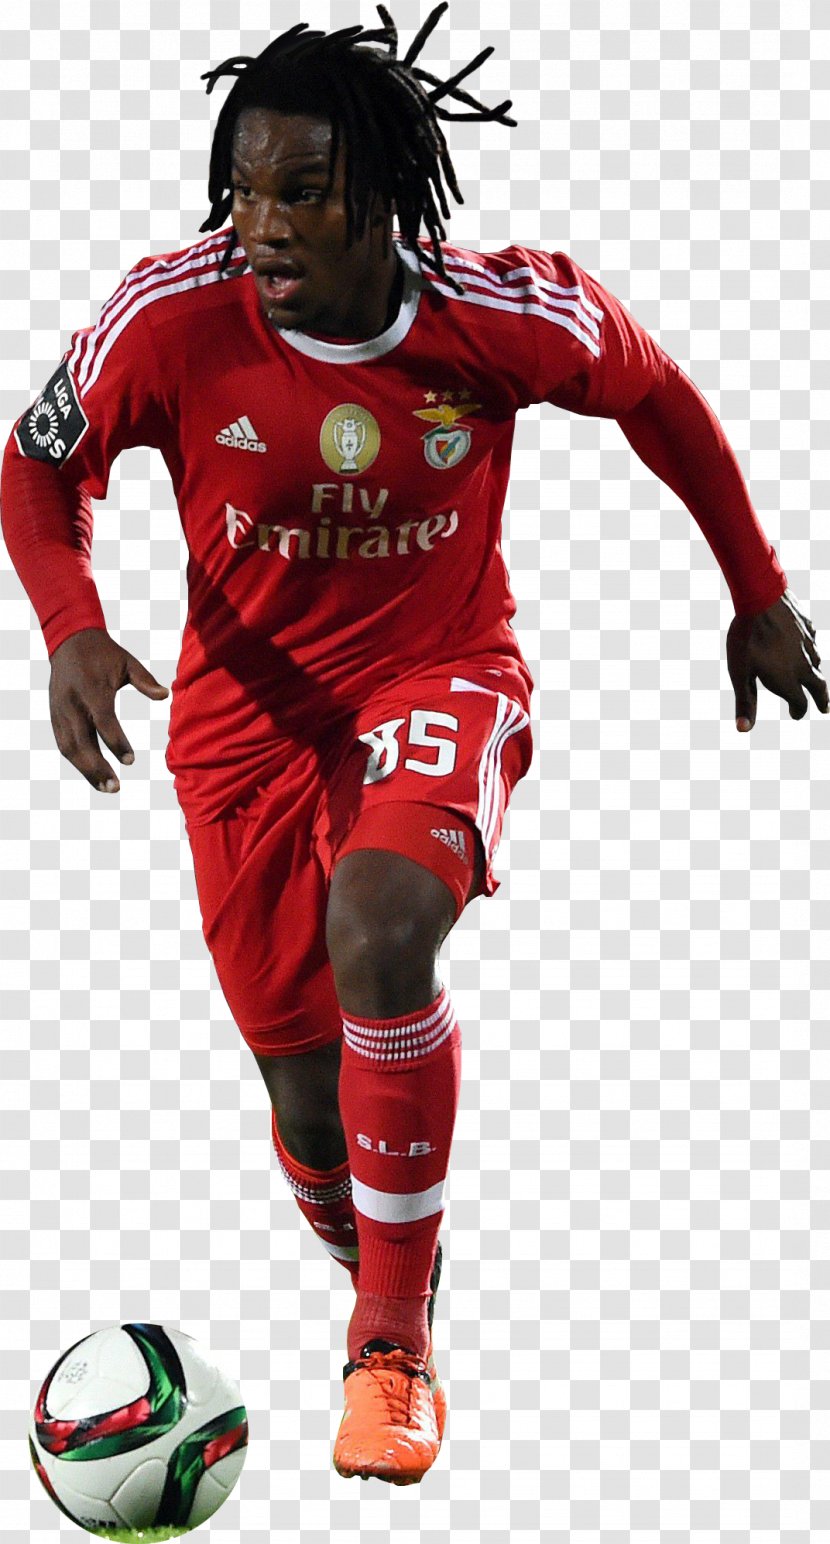 Renato Sanches S.L. Benfica Portugal National Football Team Soccer Player FC Bayern Munich Transparent PNG